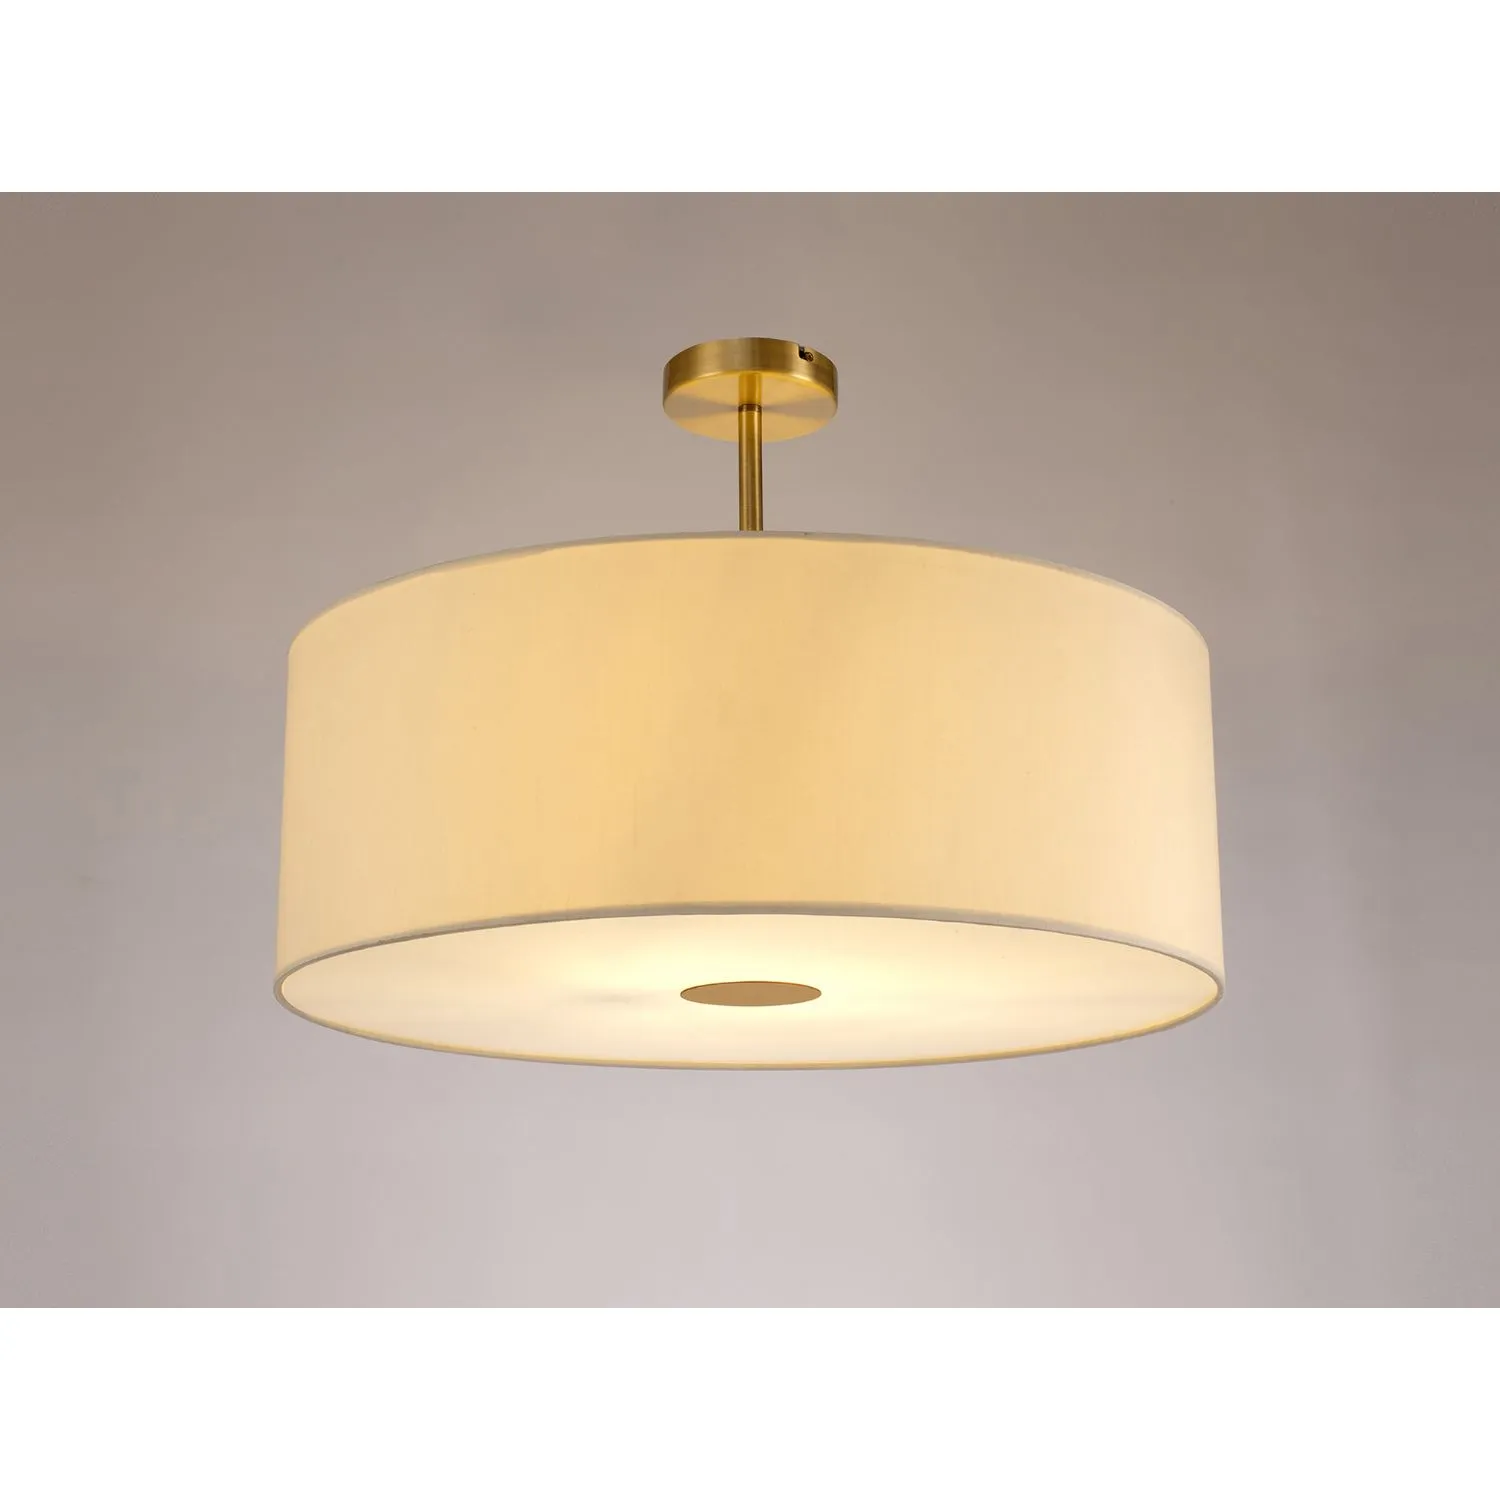 Baymont Antique Brass 1 Light E27 Semi Flush c w 600mm Faux Silk Shade, Ivory Pearl White Laminate c w 600mm Frosted AB Acrylic Diffuser